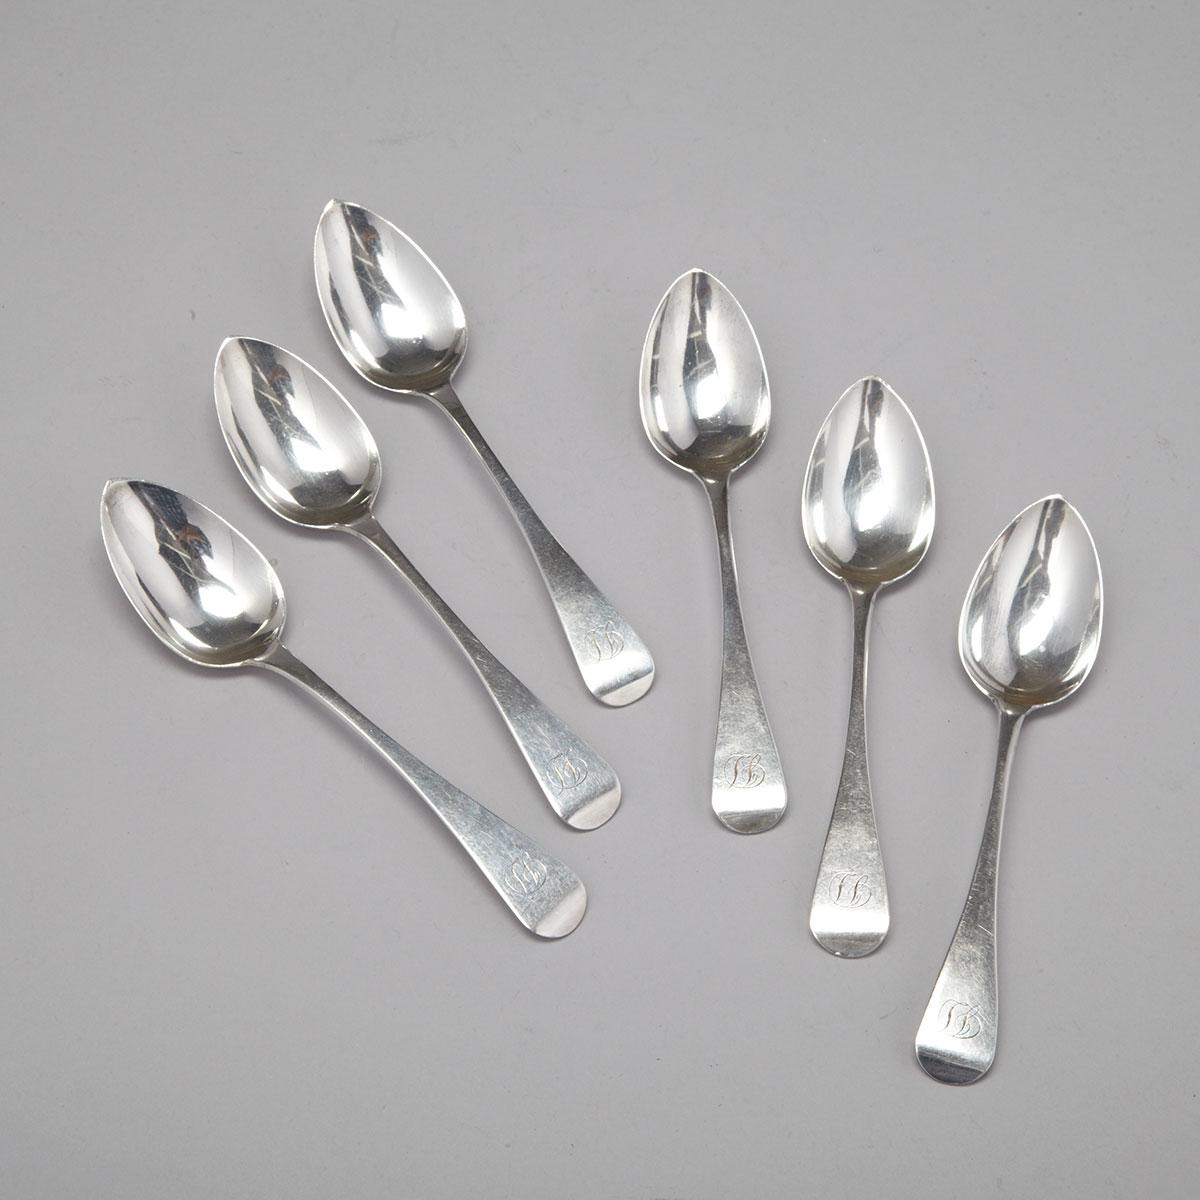 Six William IV Silver Old English Pattern Tea Spoons, James Barber & William North, York, 1836